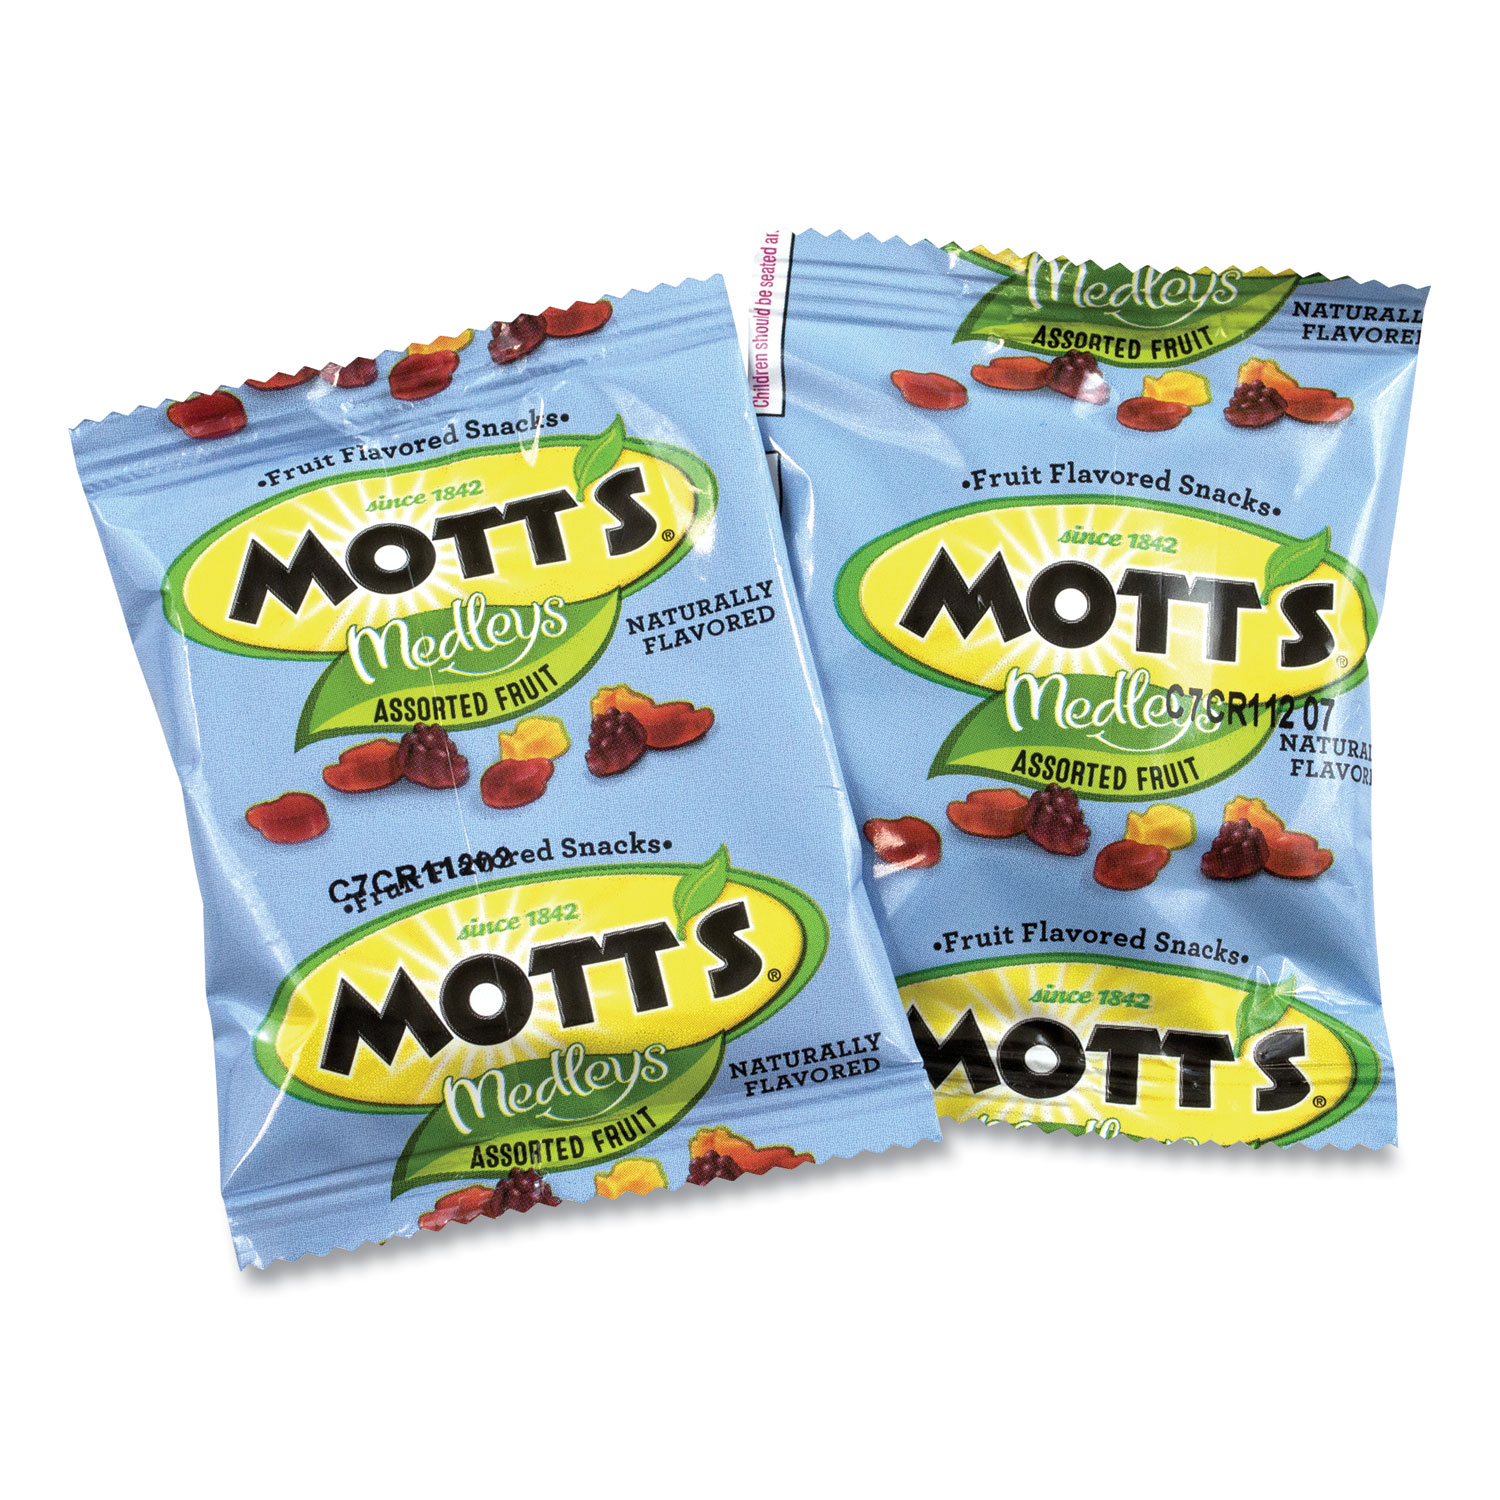 Mott's® Medleys Fruit Snacks, 0.8 oz Pouch, 90 Pouches/Box, Delivered